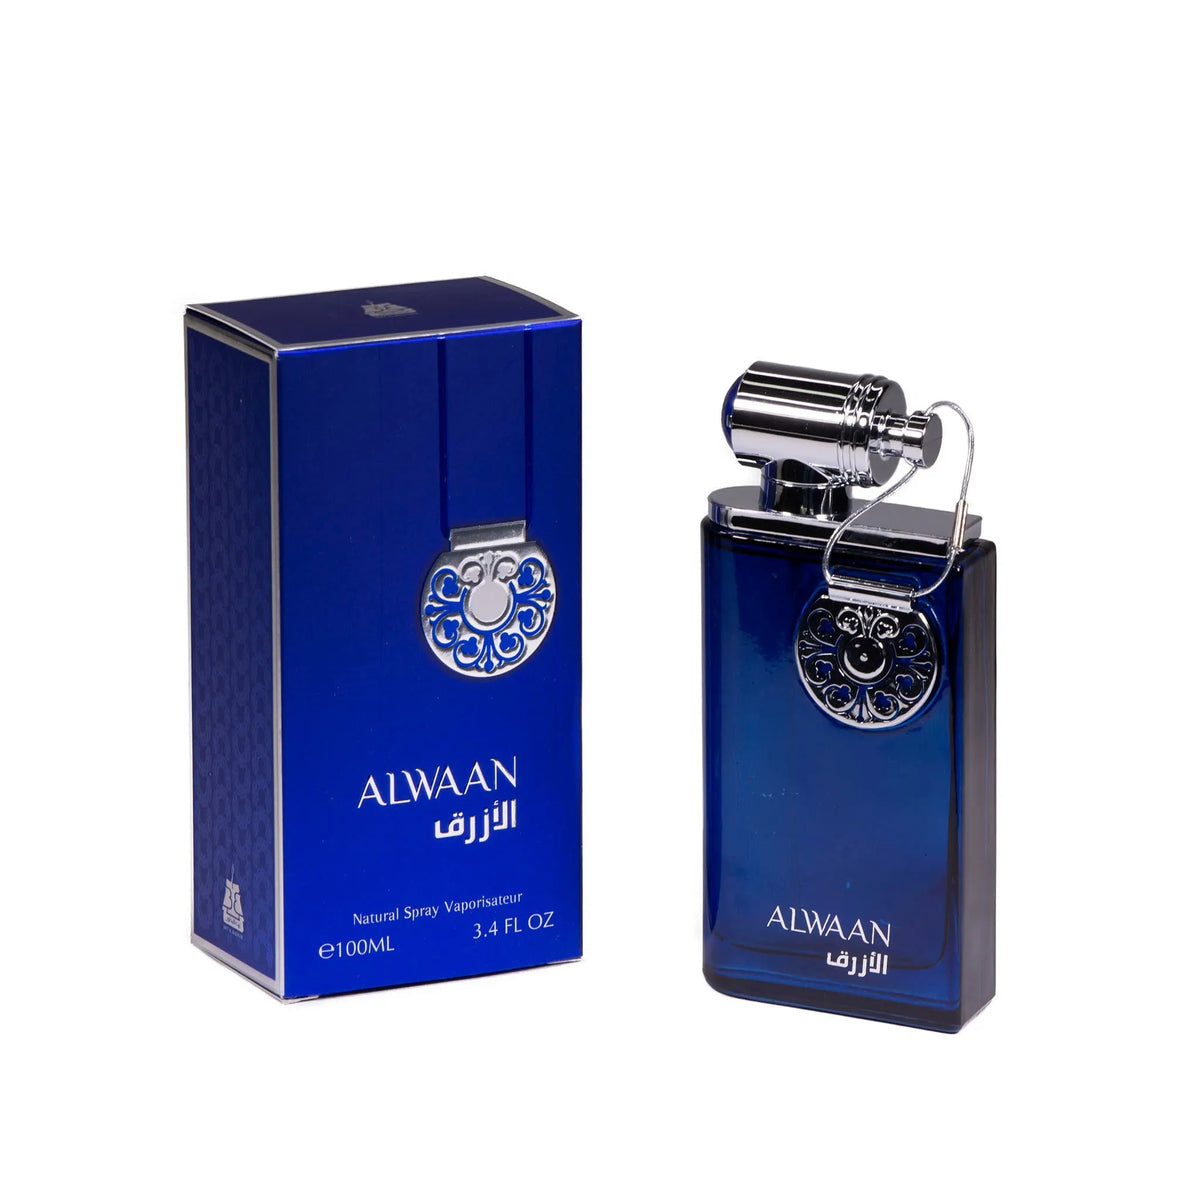 The image shows a bottle of Alwaan eau de parfum and its accompanying packaging. The perfume bottle is a deep blue color with a decorative silver emblem and a unique cap that resembles a lock and key mechanism, suggesting a theme of exclusivity or treasure. The front of the bottle has the name "ALWAAN" above the Arabic script. The packaging is a matching blue box with a similar emblem and the text "ALWAAN" in white, along with the Arabic translation.